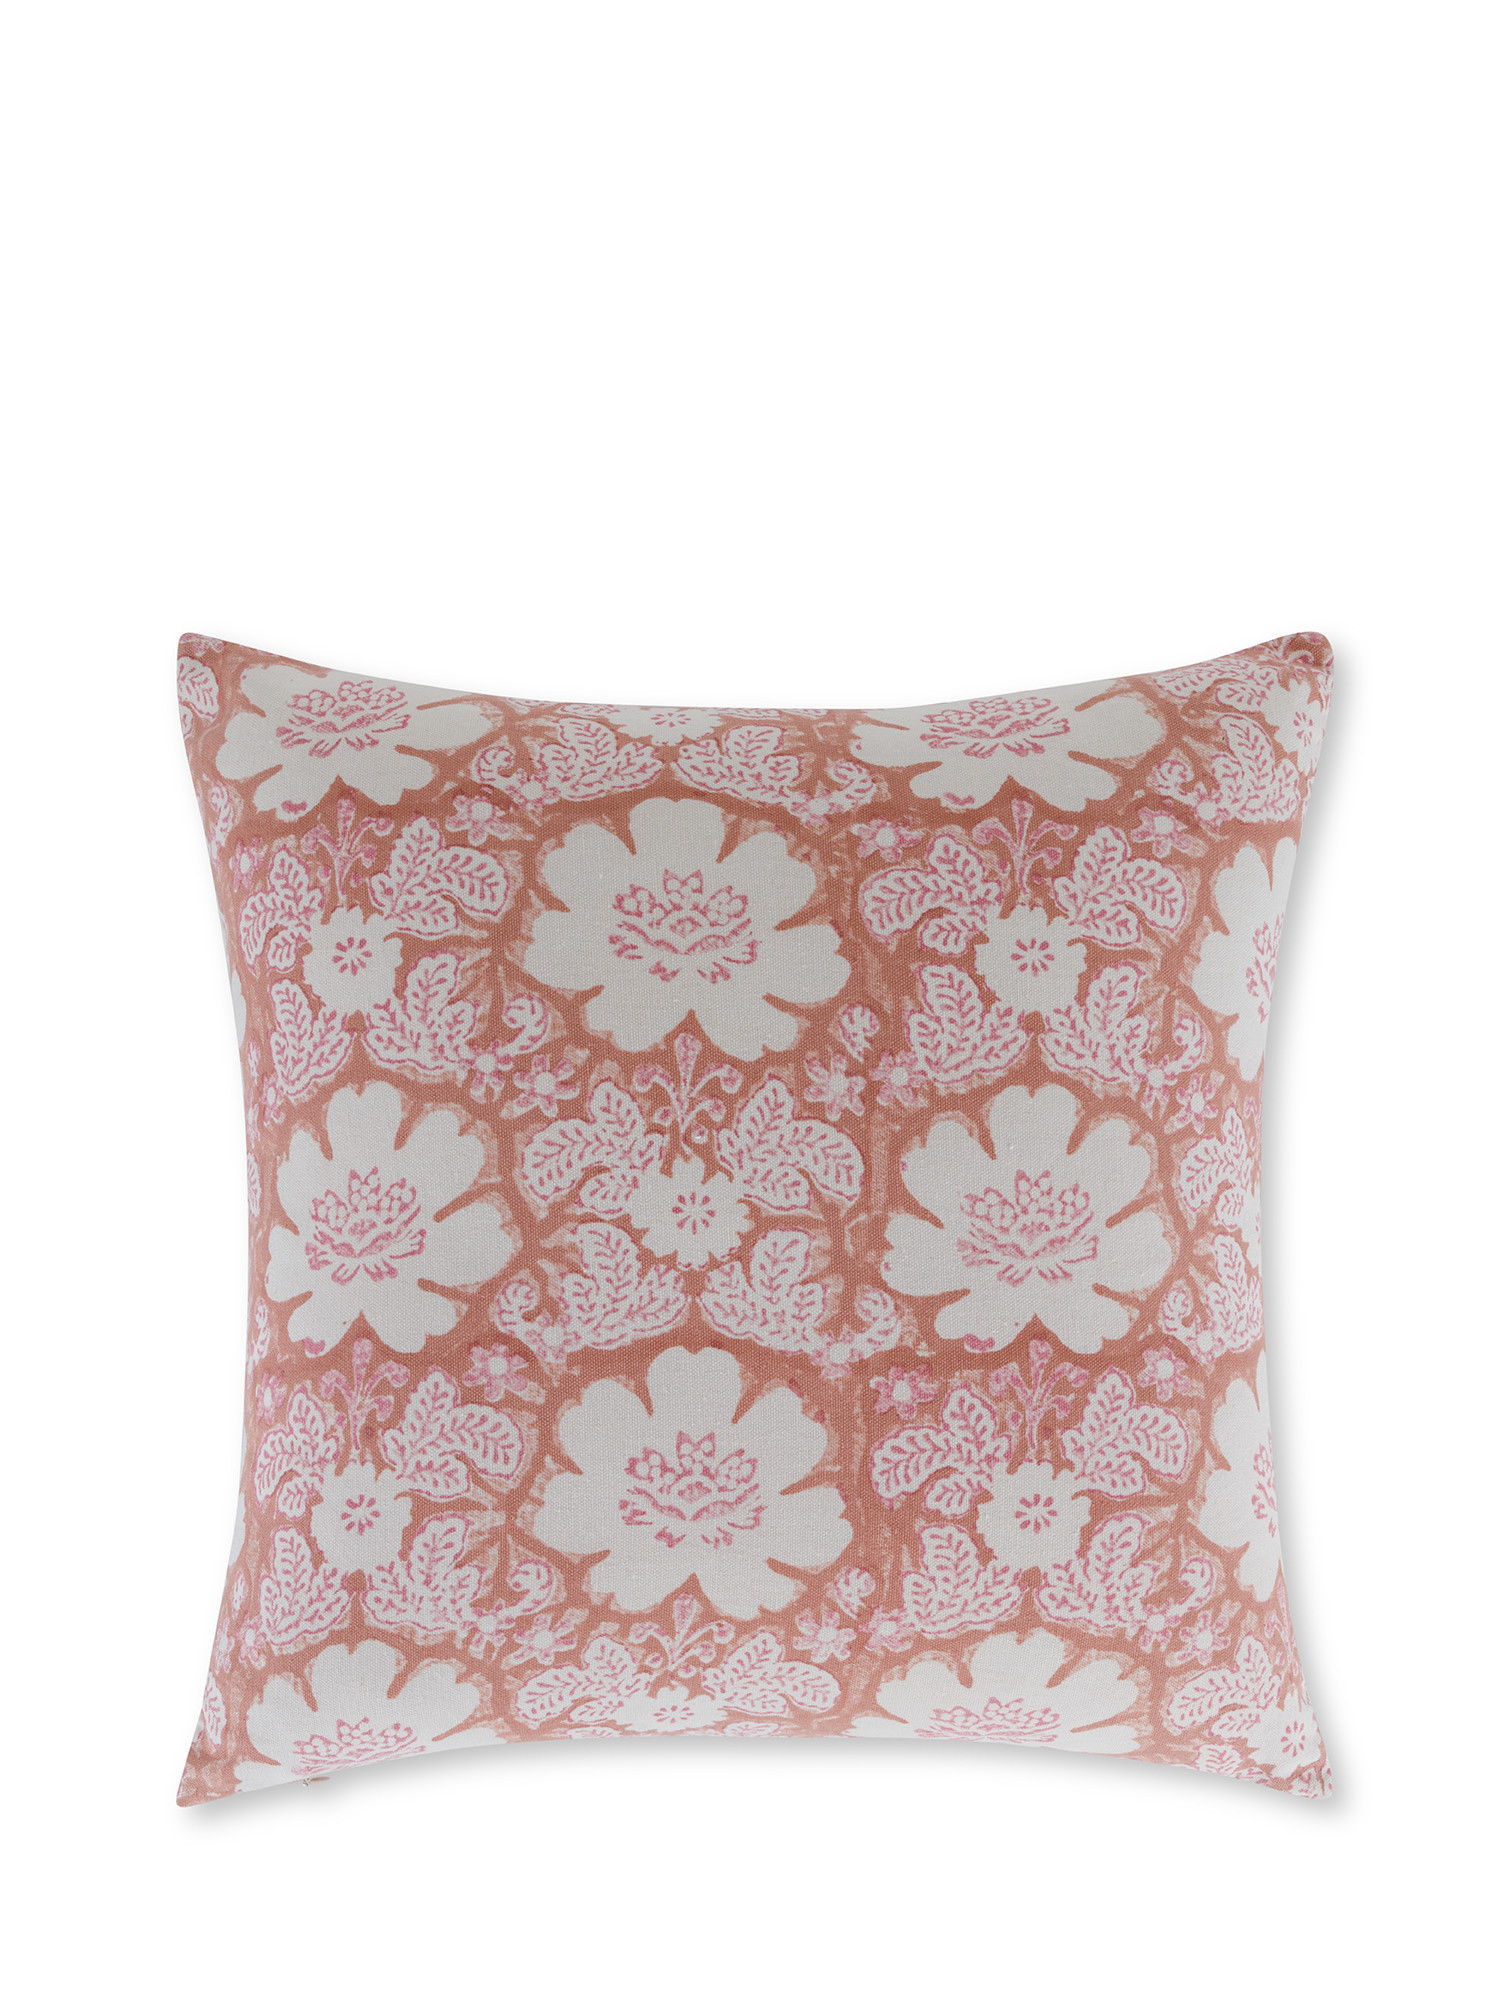 Cushion with flower print 45x45 cm, Pink, large image number 0